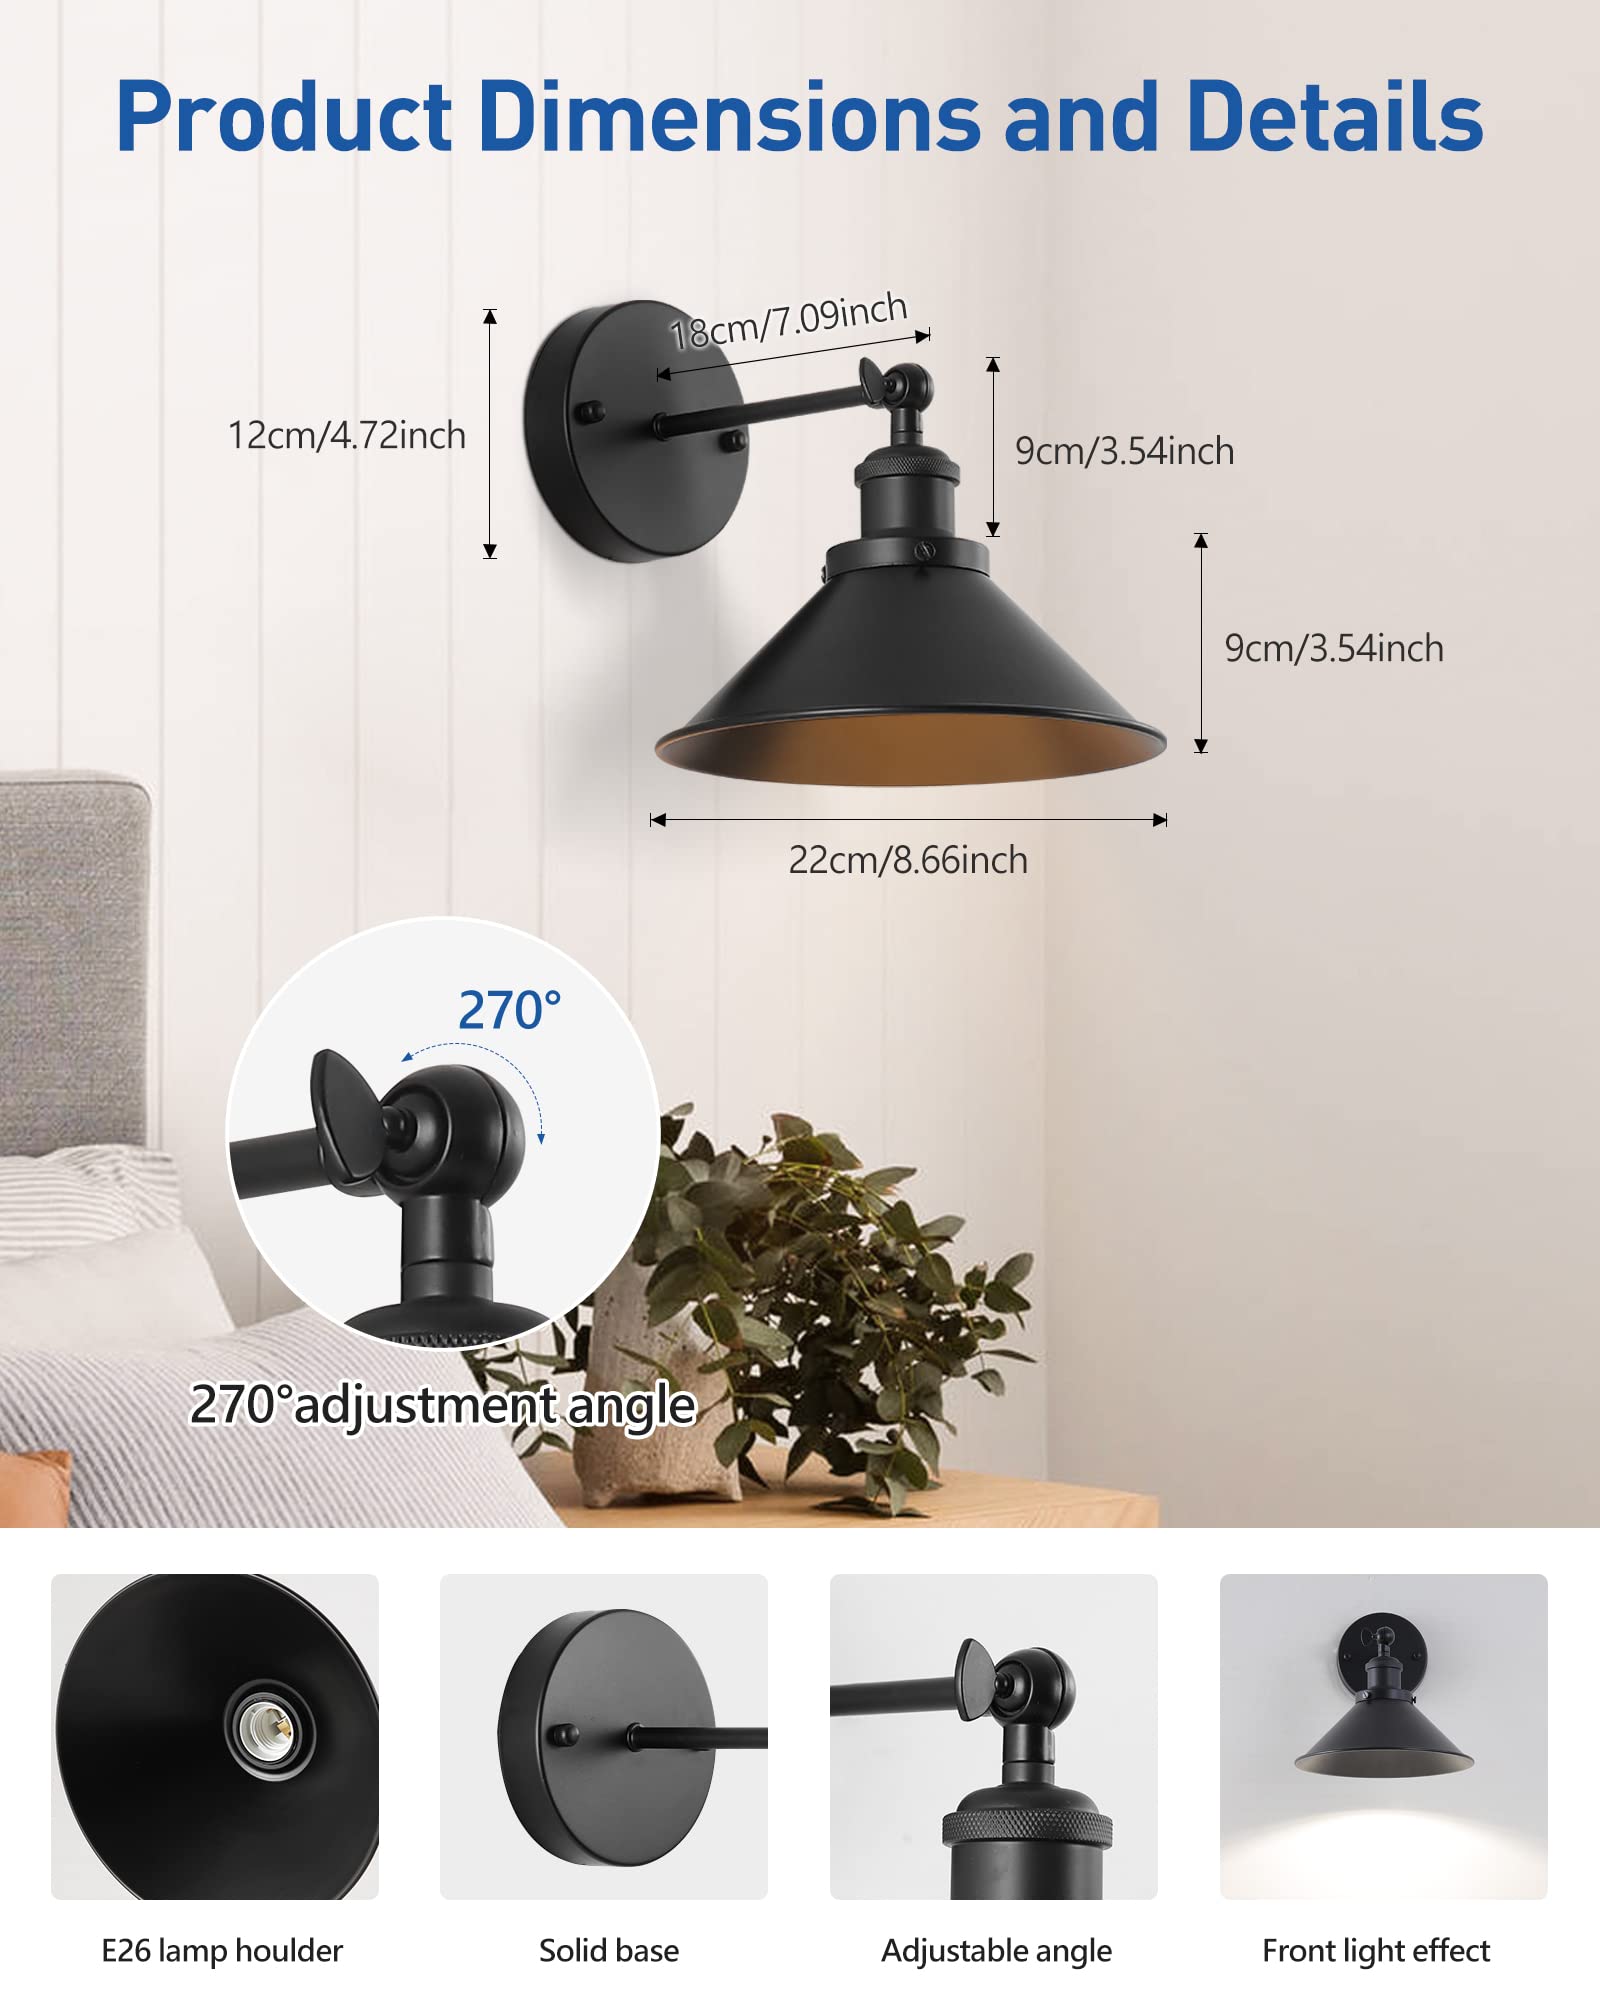 Bailoch Black Vintage Wireless Battery Operated Wall Sconces, Industrial Cordless Battery Powered Led Wall Lights Set of 2, Wall Lamp Fixture Indoor with Remote Control for Bedroom Farmhouse Gallery